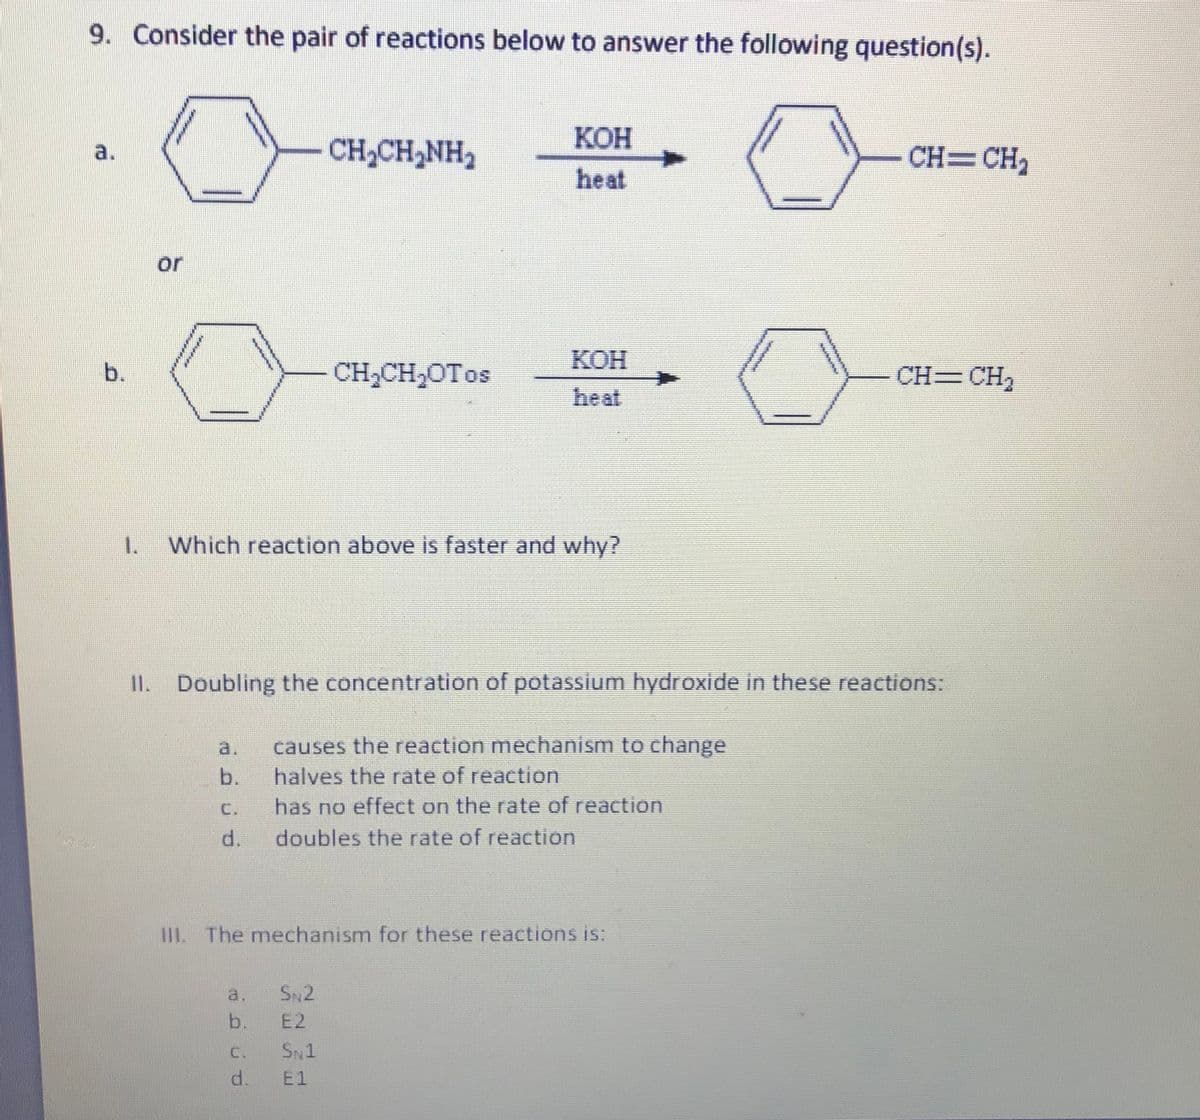 9. Consider the pair of reactions below to answer the following question(s).
КОН
a.
CH,CH,NH2
CH=CH,
heat
or
КОН
CH;CH,OTos
CH=CH,
heat
1.
Which reaction above is faster and why?
II. Doubling the concentration of potassium hydroxide in these reactions:
a.
causes the reaction mechanism to change
b.
halves the rate of reaction
C.
has no effect on the rate of reaction
d.
doubles the rate of reaction
IL The mechanism for these reactionsis:
a.
SN2
b.
E2
C.
SN1
d.
E1
b.
